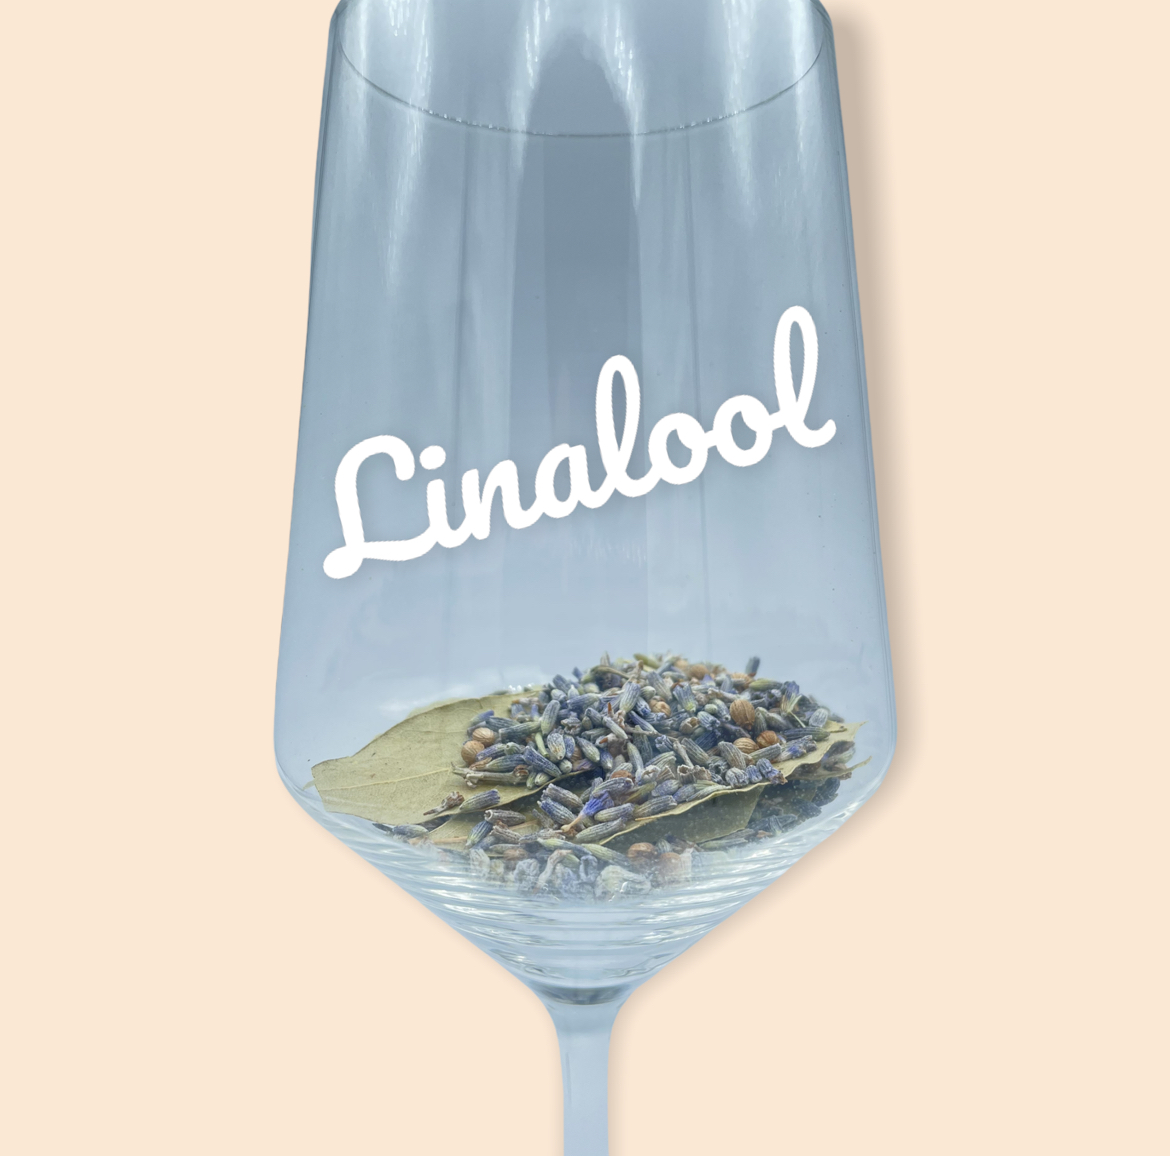 Linalool - floral, spicy or woody aroma